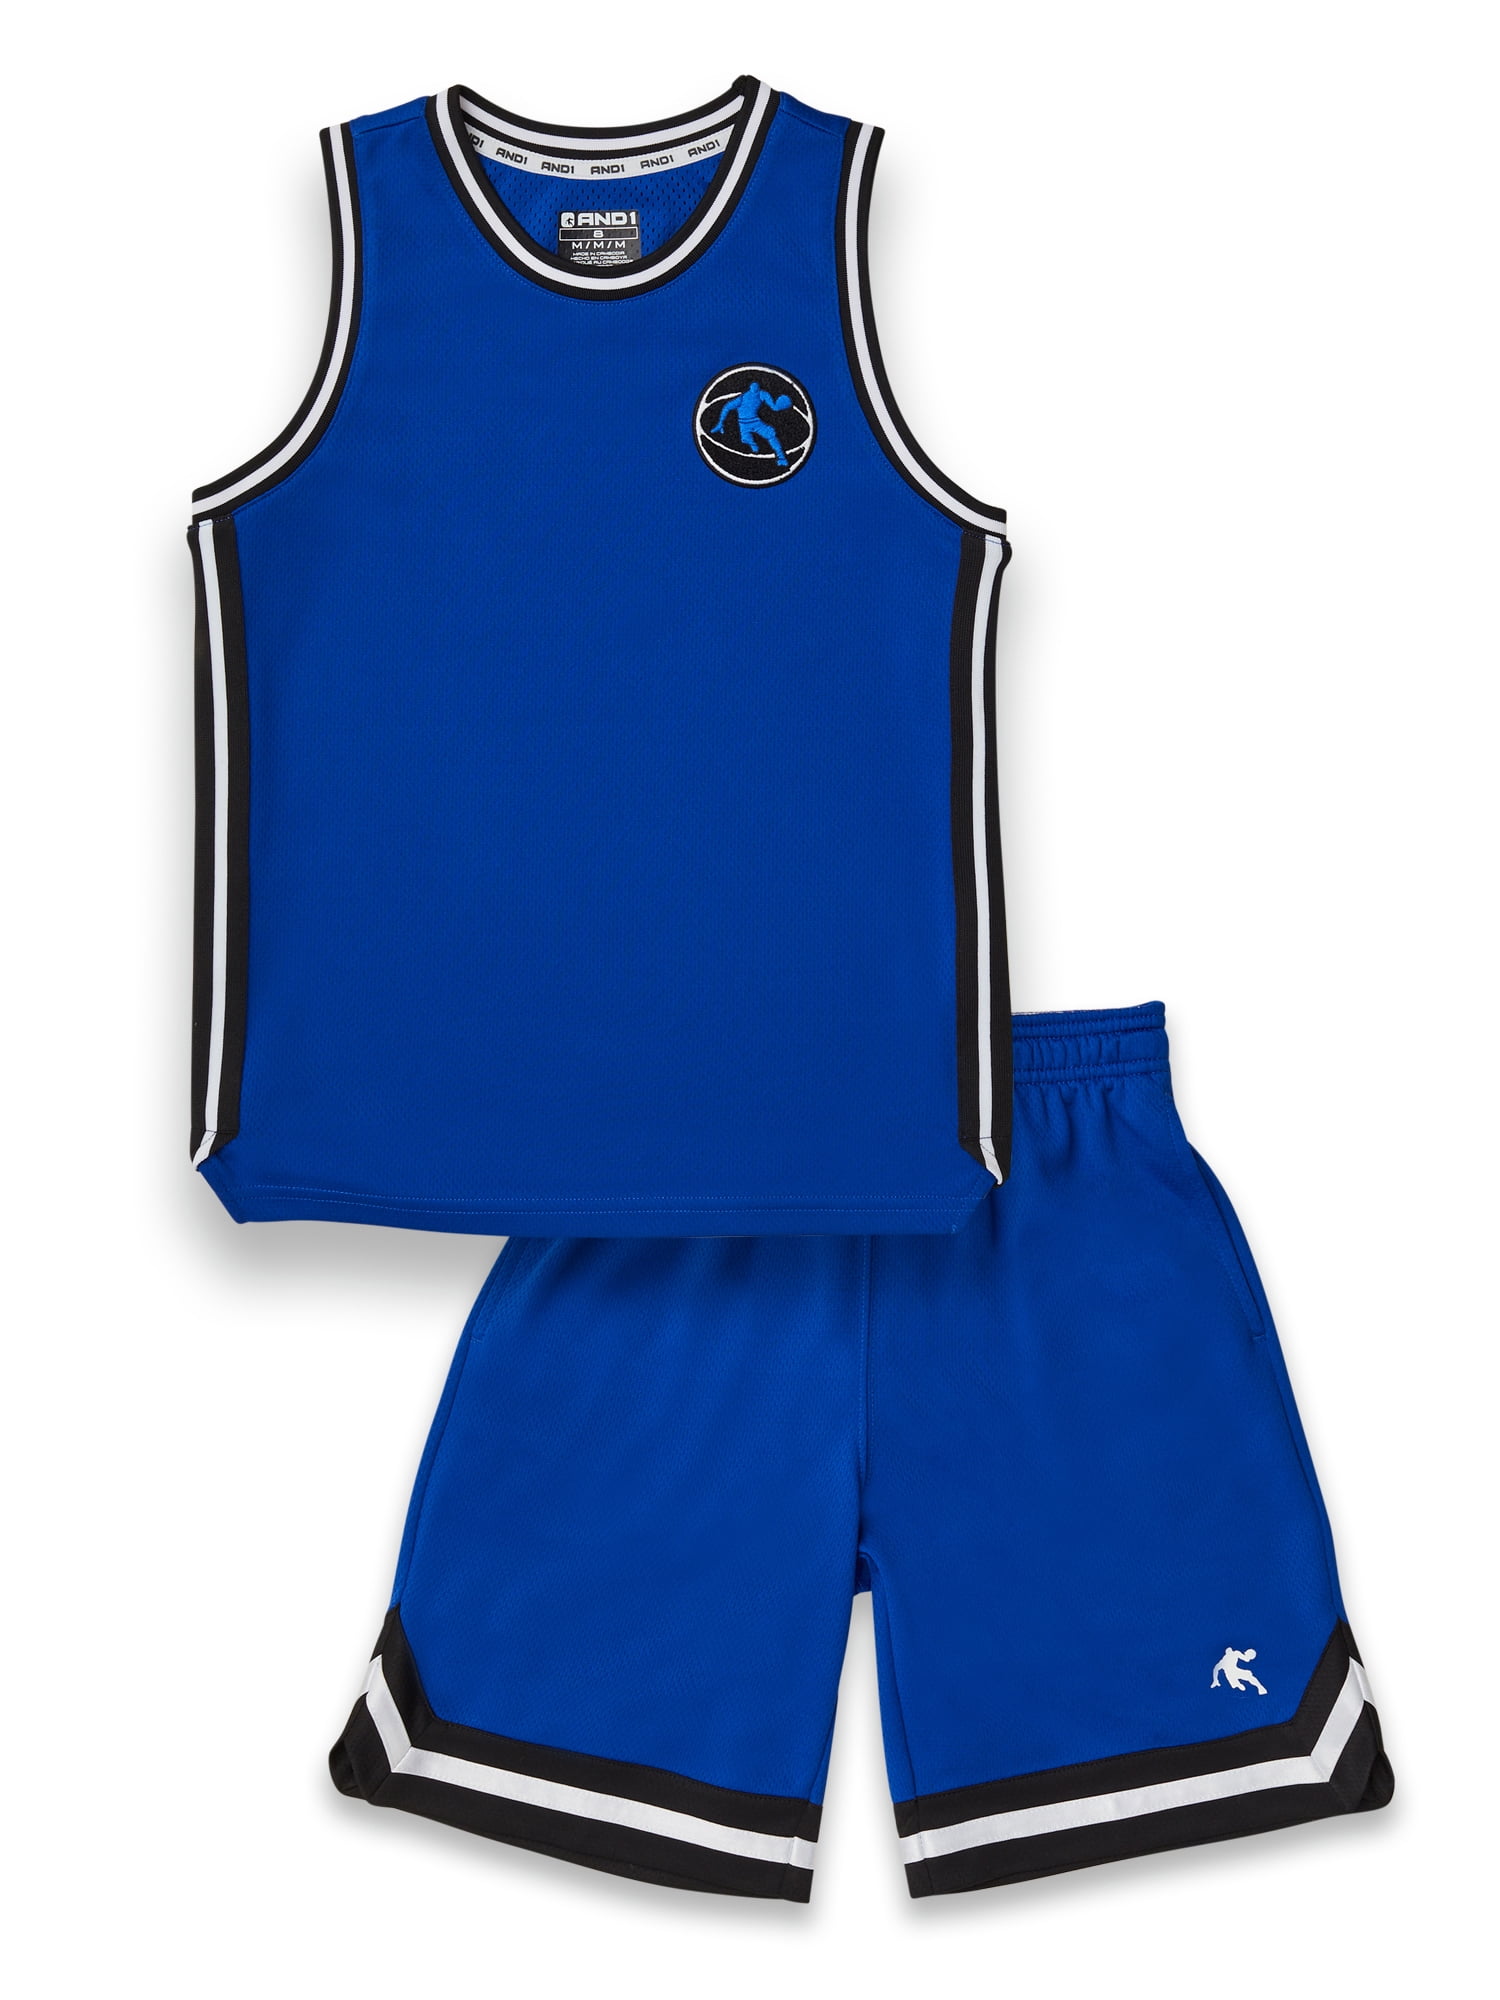 Hiheart Boys Basketball Jersey and Short Set Outfit 2 Piece Team Uniform with Pockets 